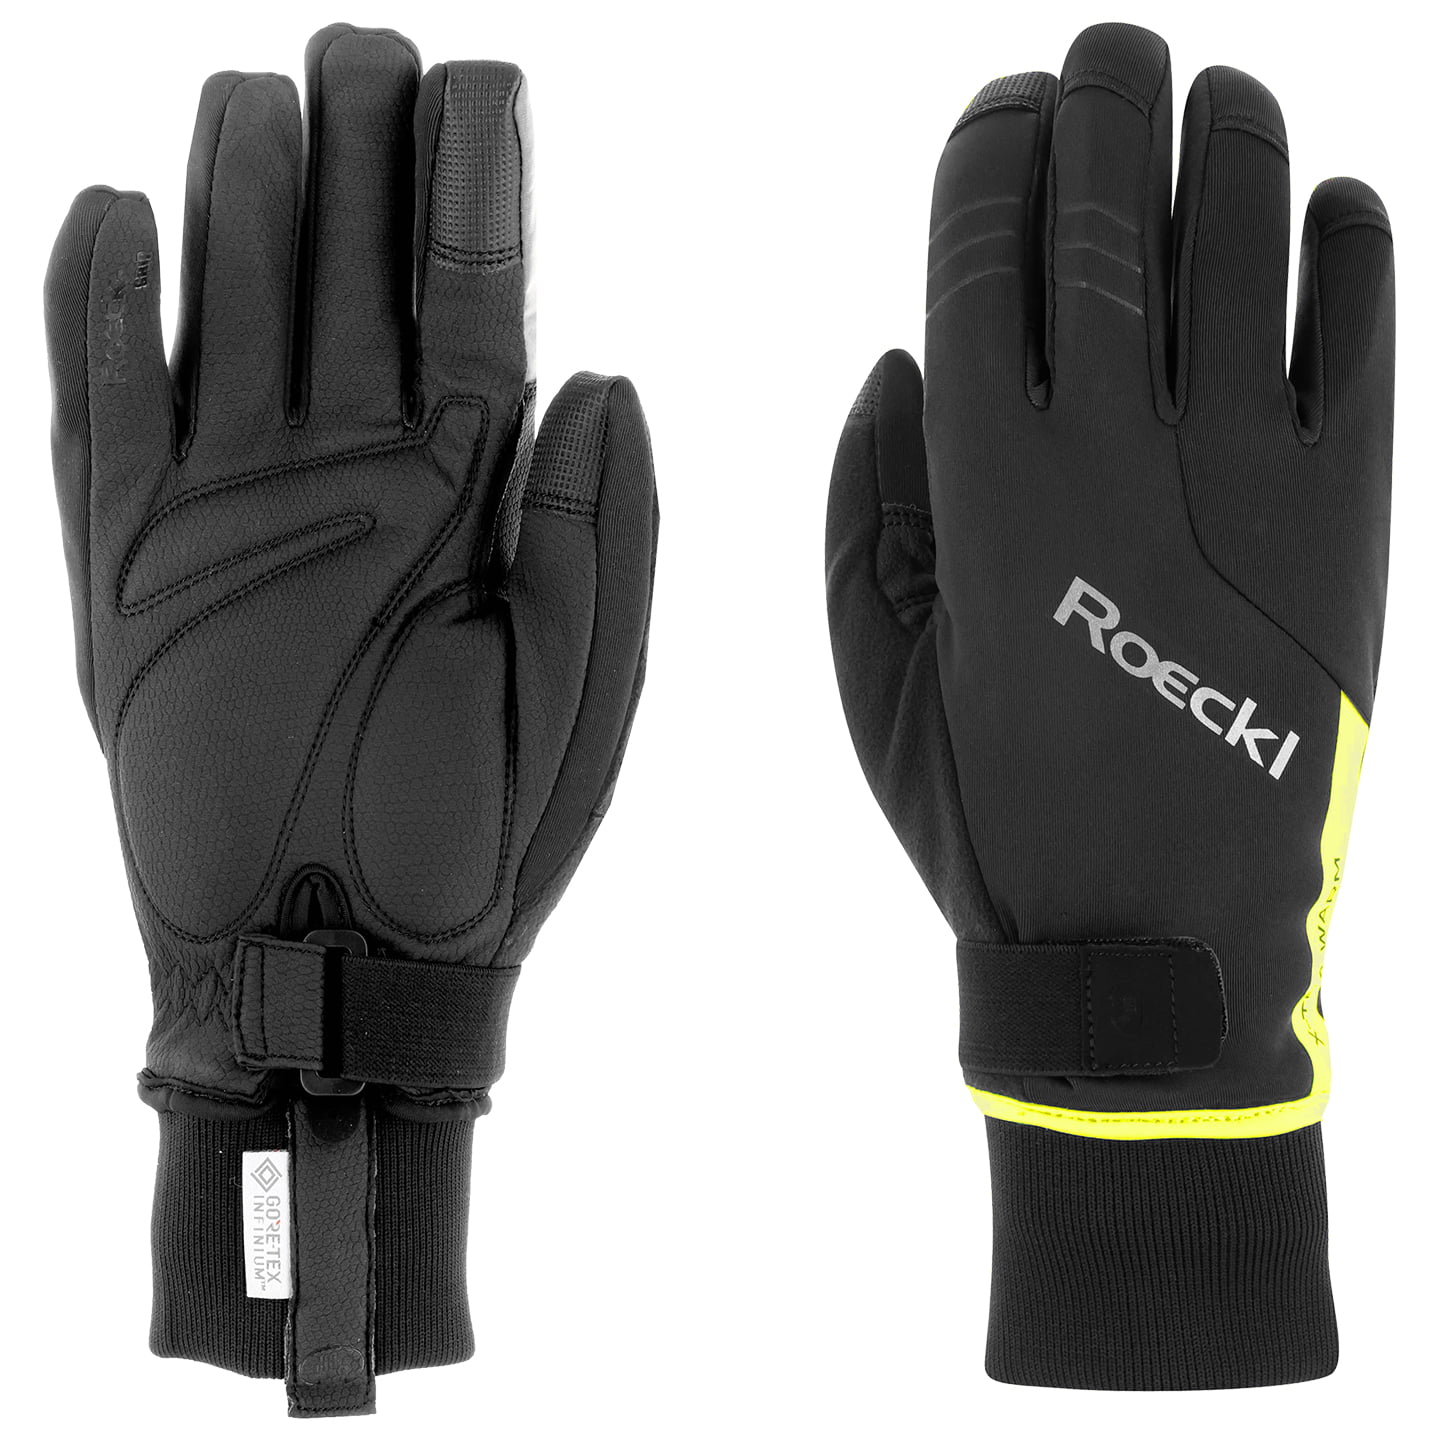 ROECKL Villach 2 Winter Gloves Winter Cycling Gloves, for men, size 6,5, MTB gloves, Bike clothes